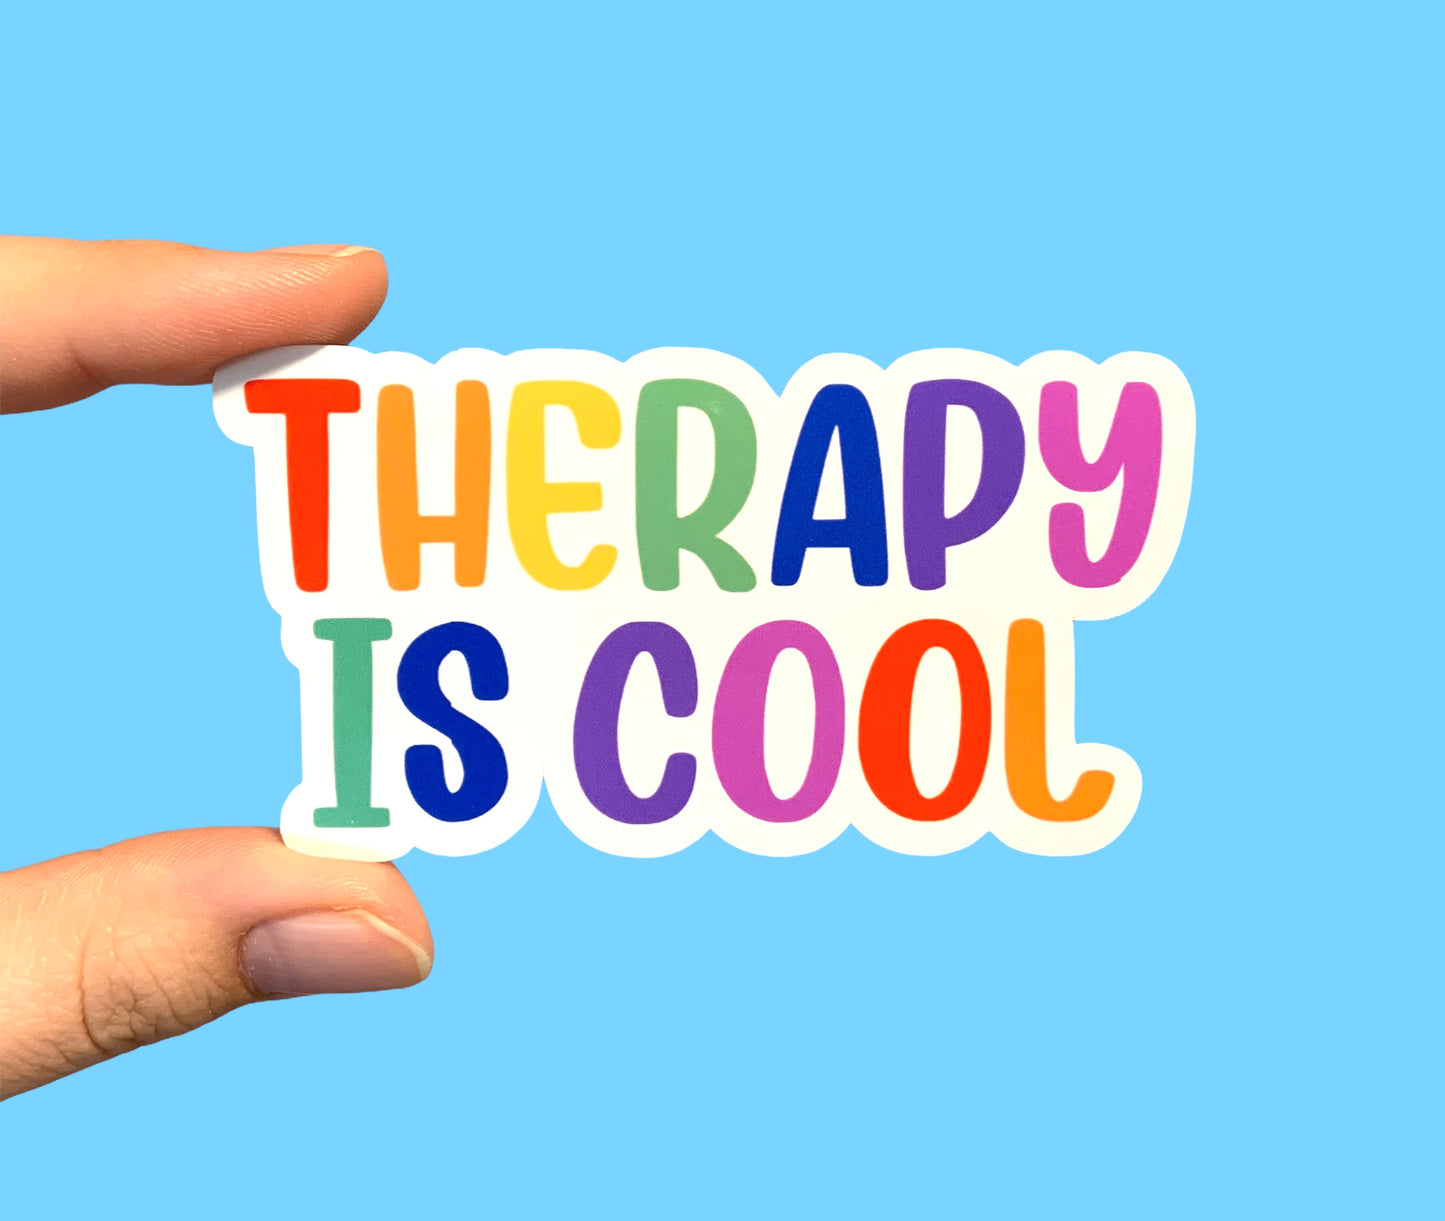 Therapy is cool (pack of 3 or 5 stickers)